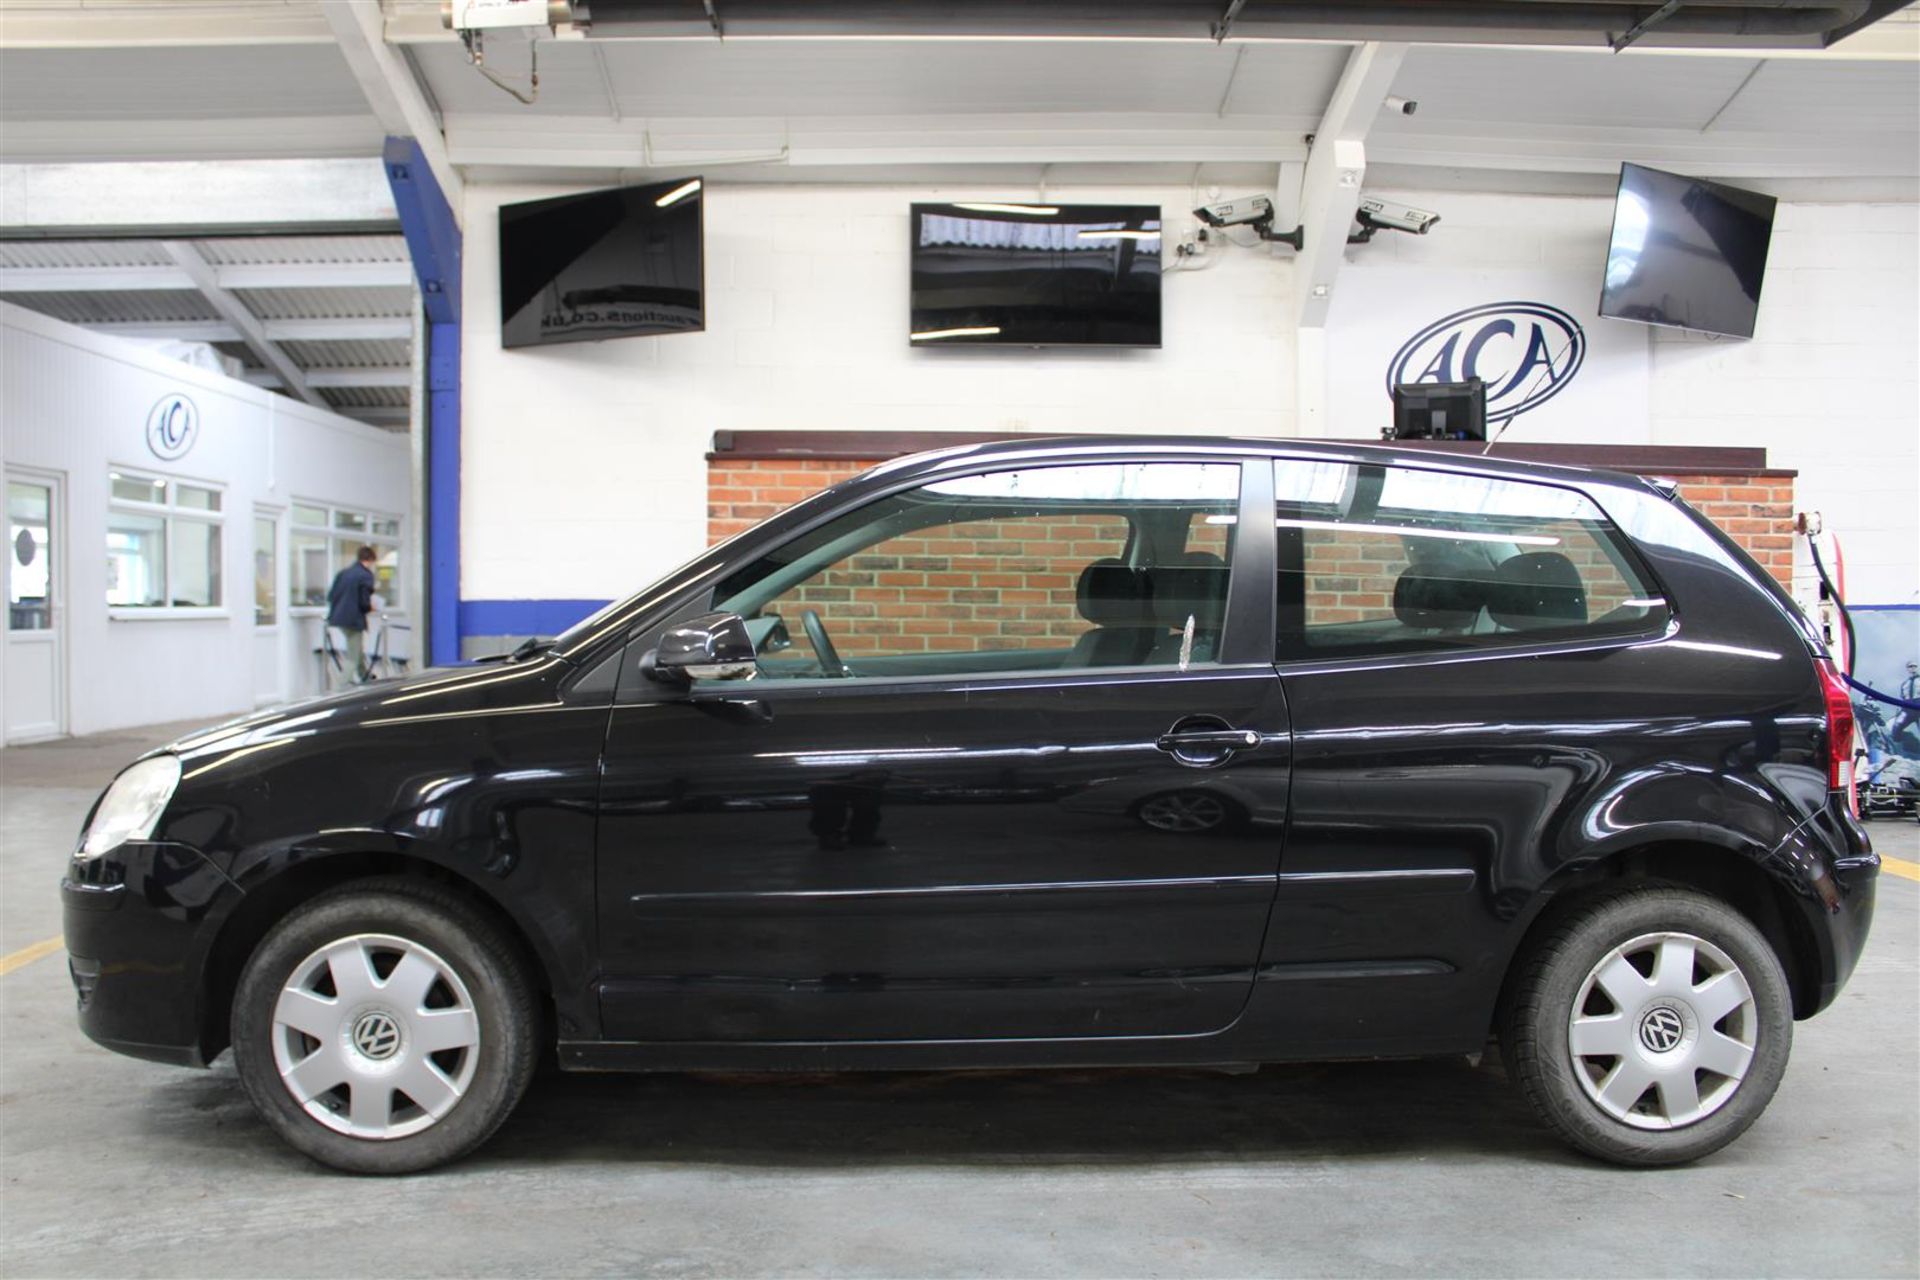 56 06 VW Polo S 64 - Image 31 of 31